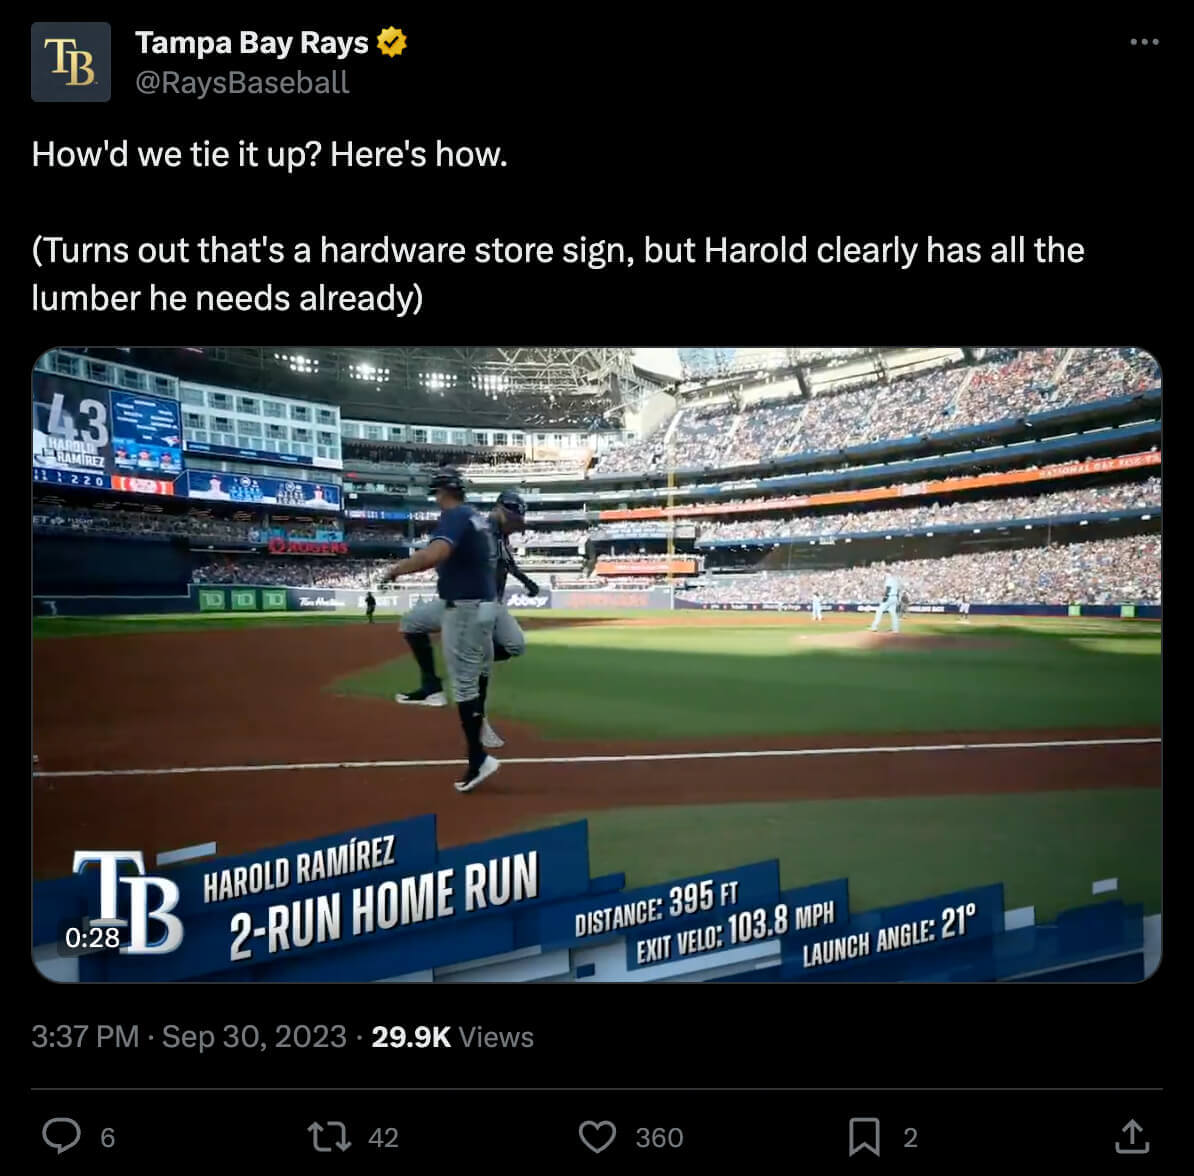 Harold using his lumber for a home run